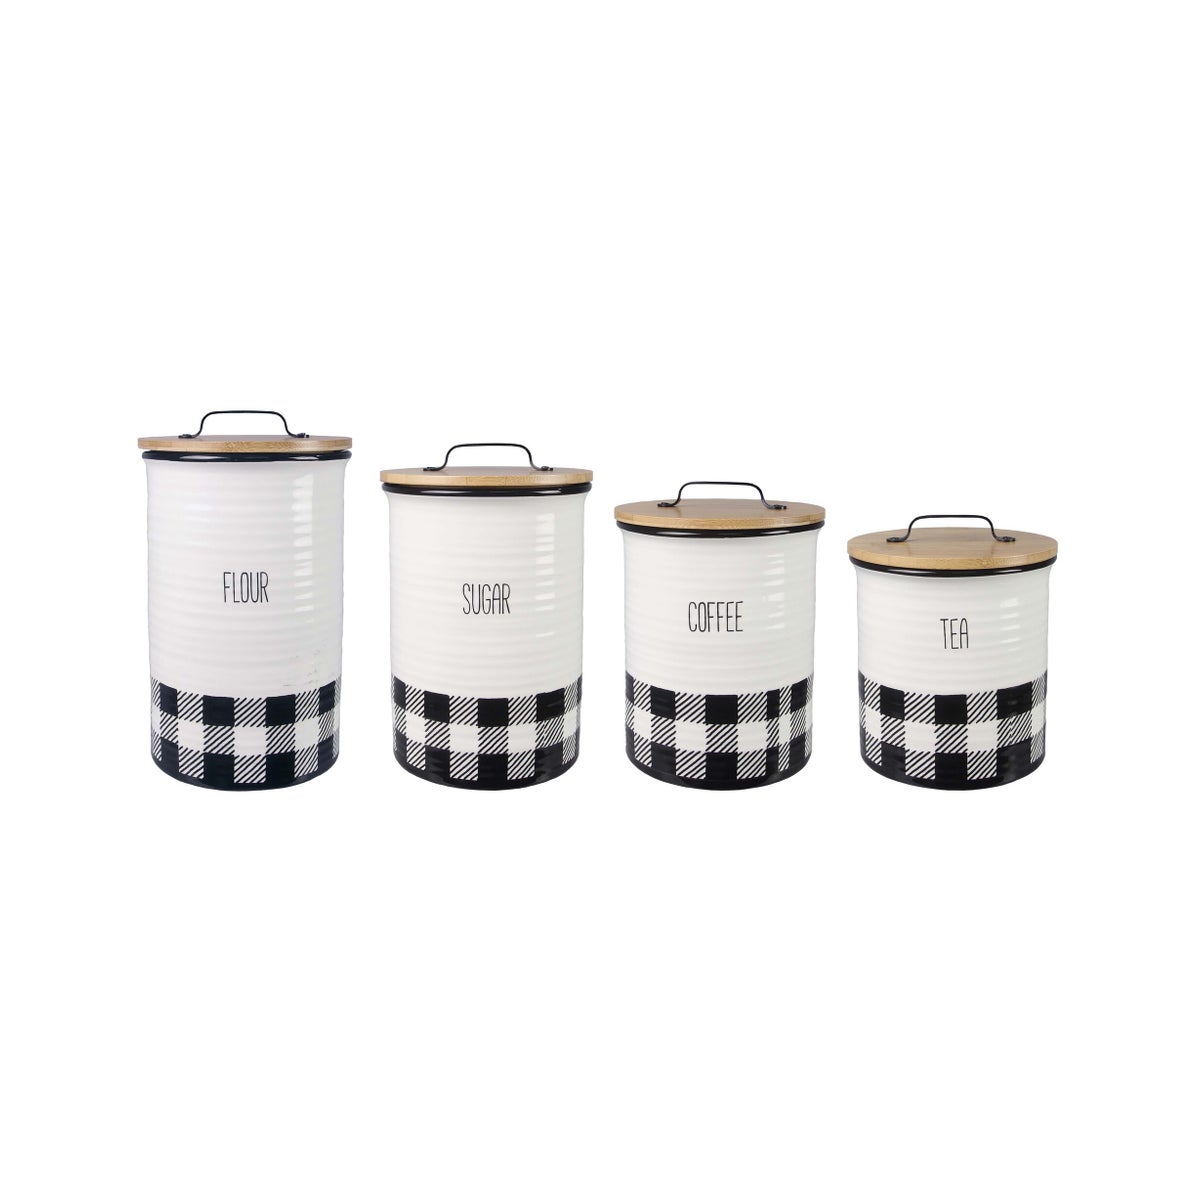 Ceramic Black and White Plaid Canister set of 4 with Bamboo Lids and Silicone Seal